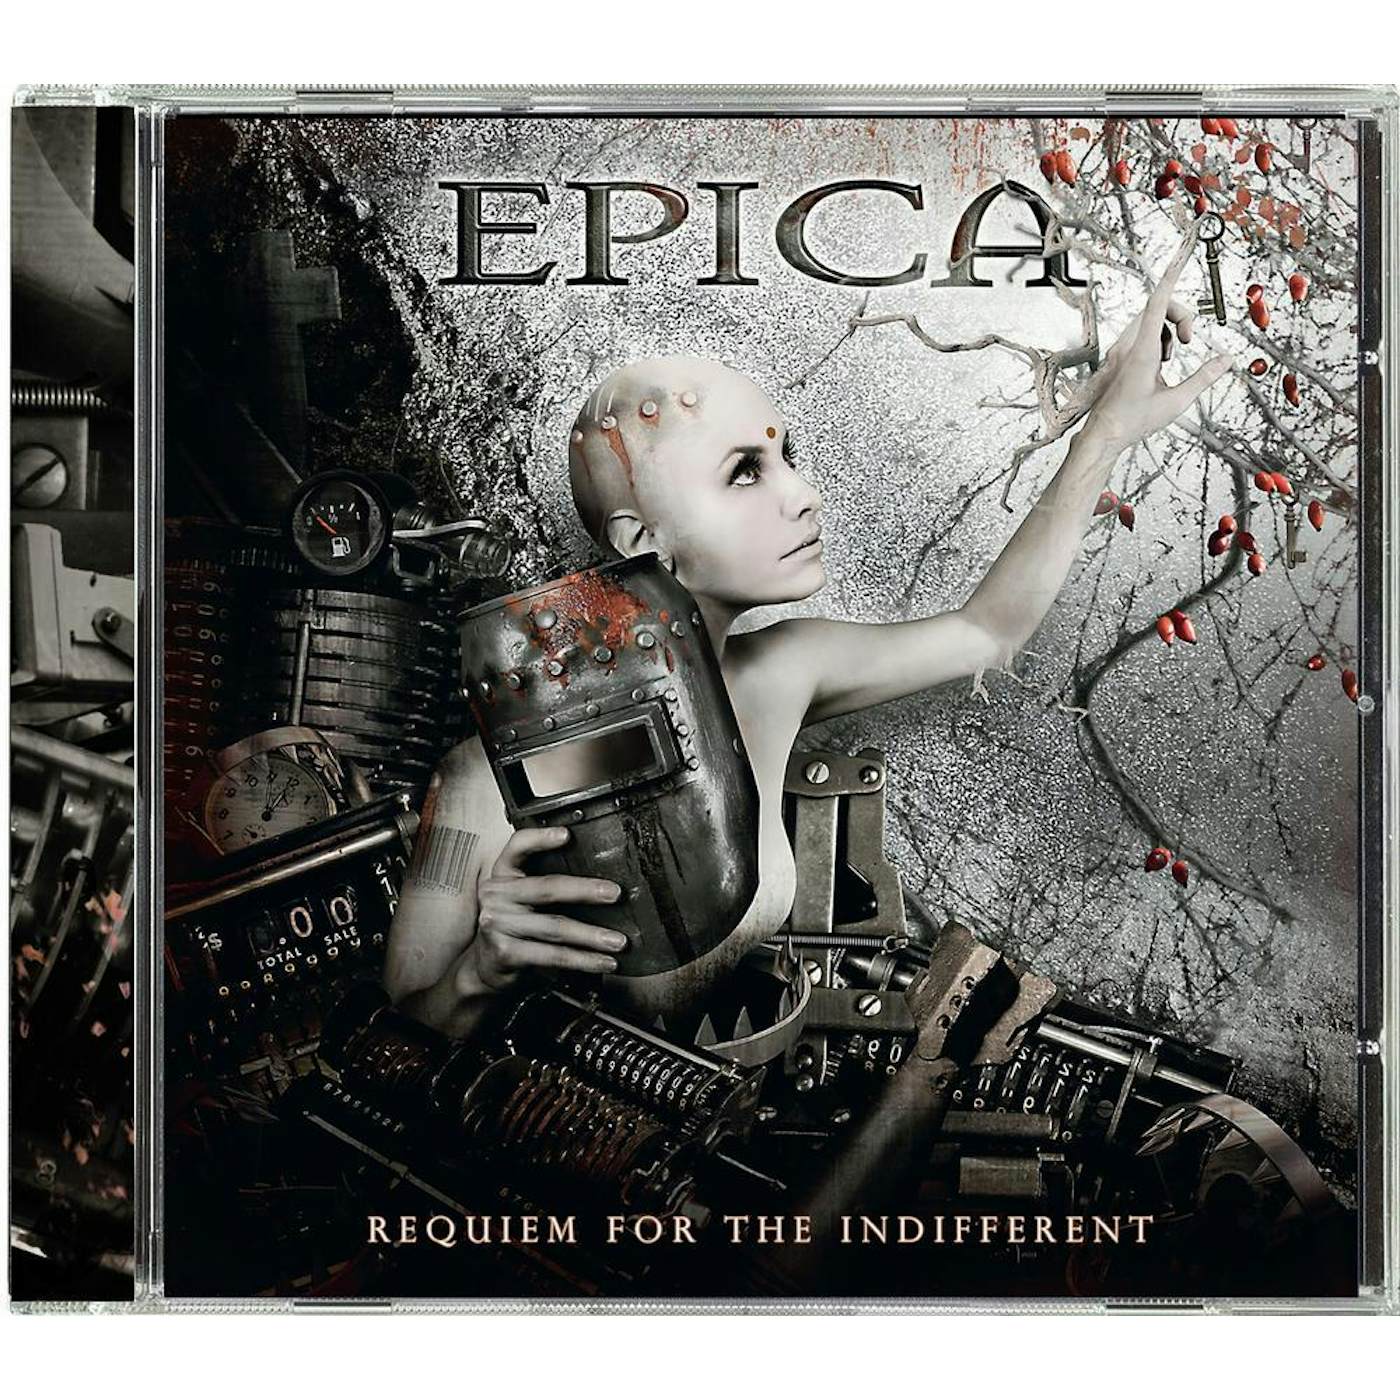 Epica "Requiem For The Indifferent" CD